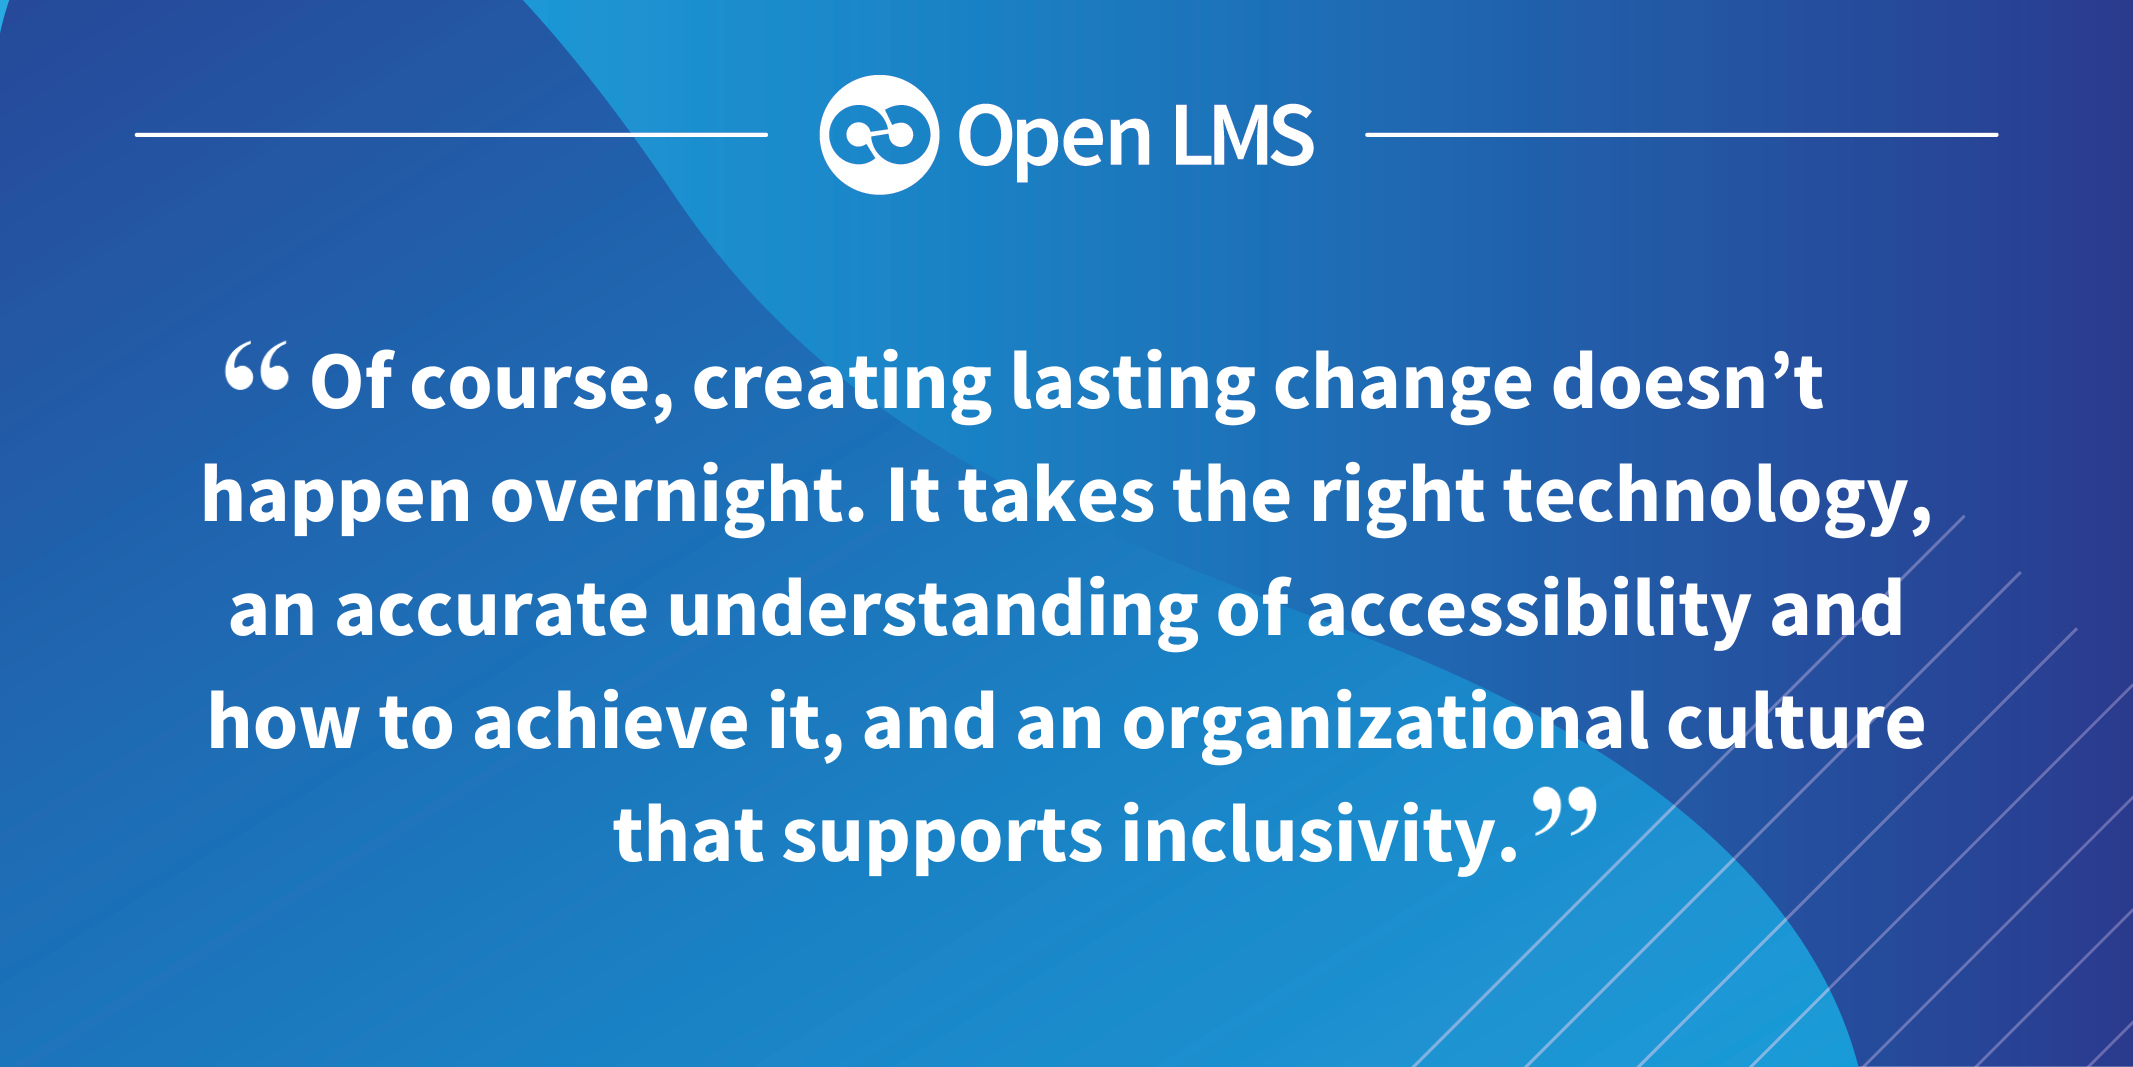 Of course, creating lasting change doesn’t happen overnight. It takes the right technology, an accurate understanding of accessibility and how to achieve it, and an organizational culture that supports inclusivity.